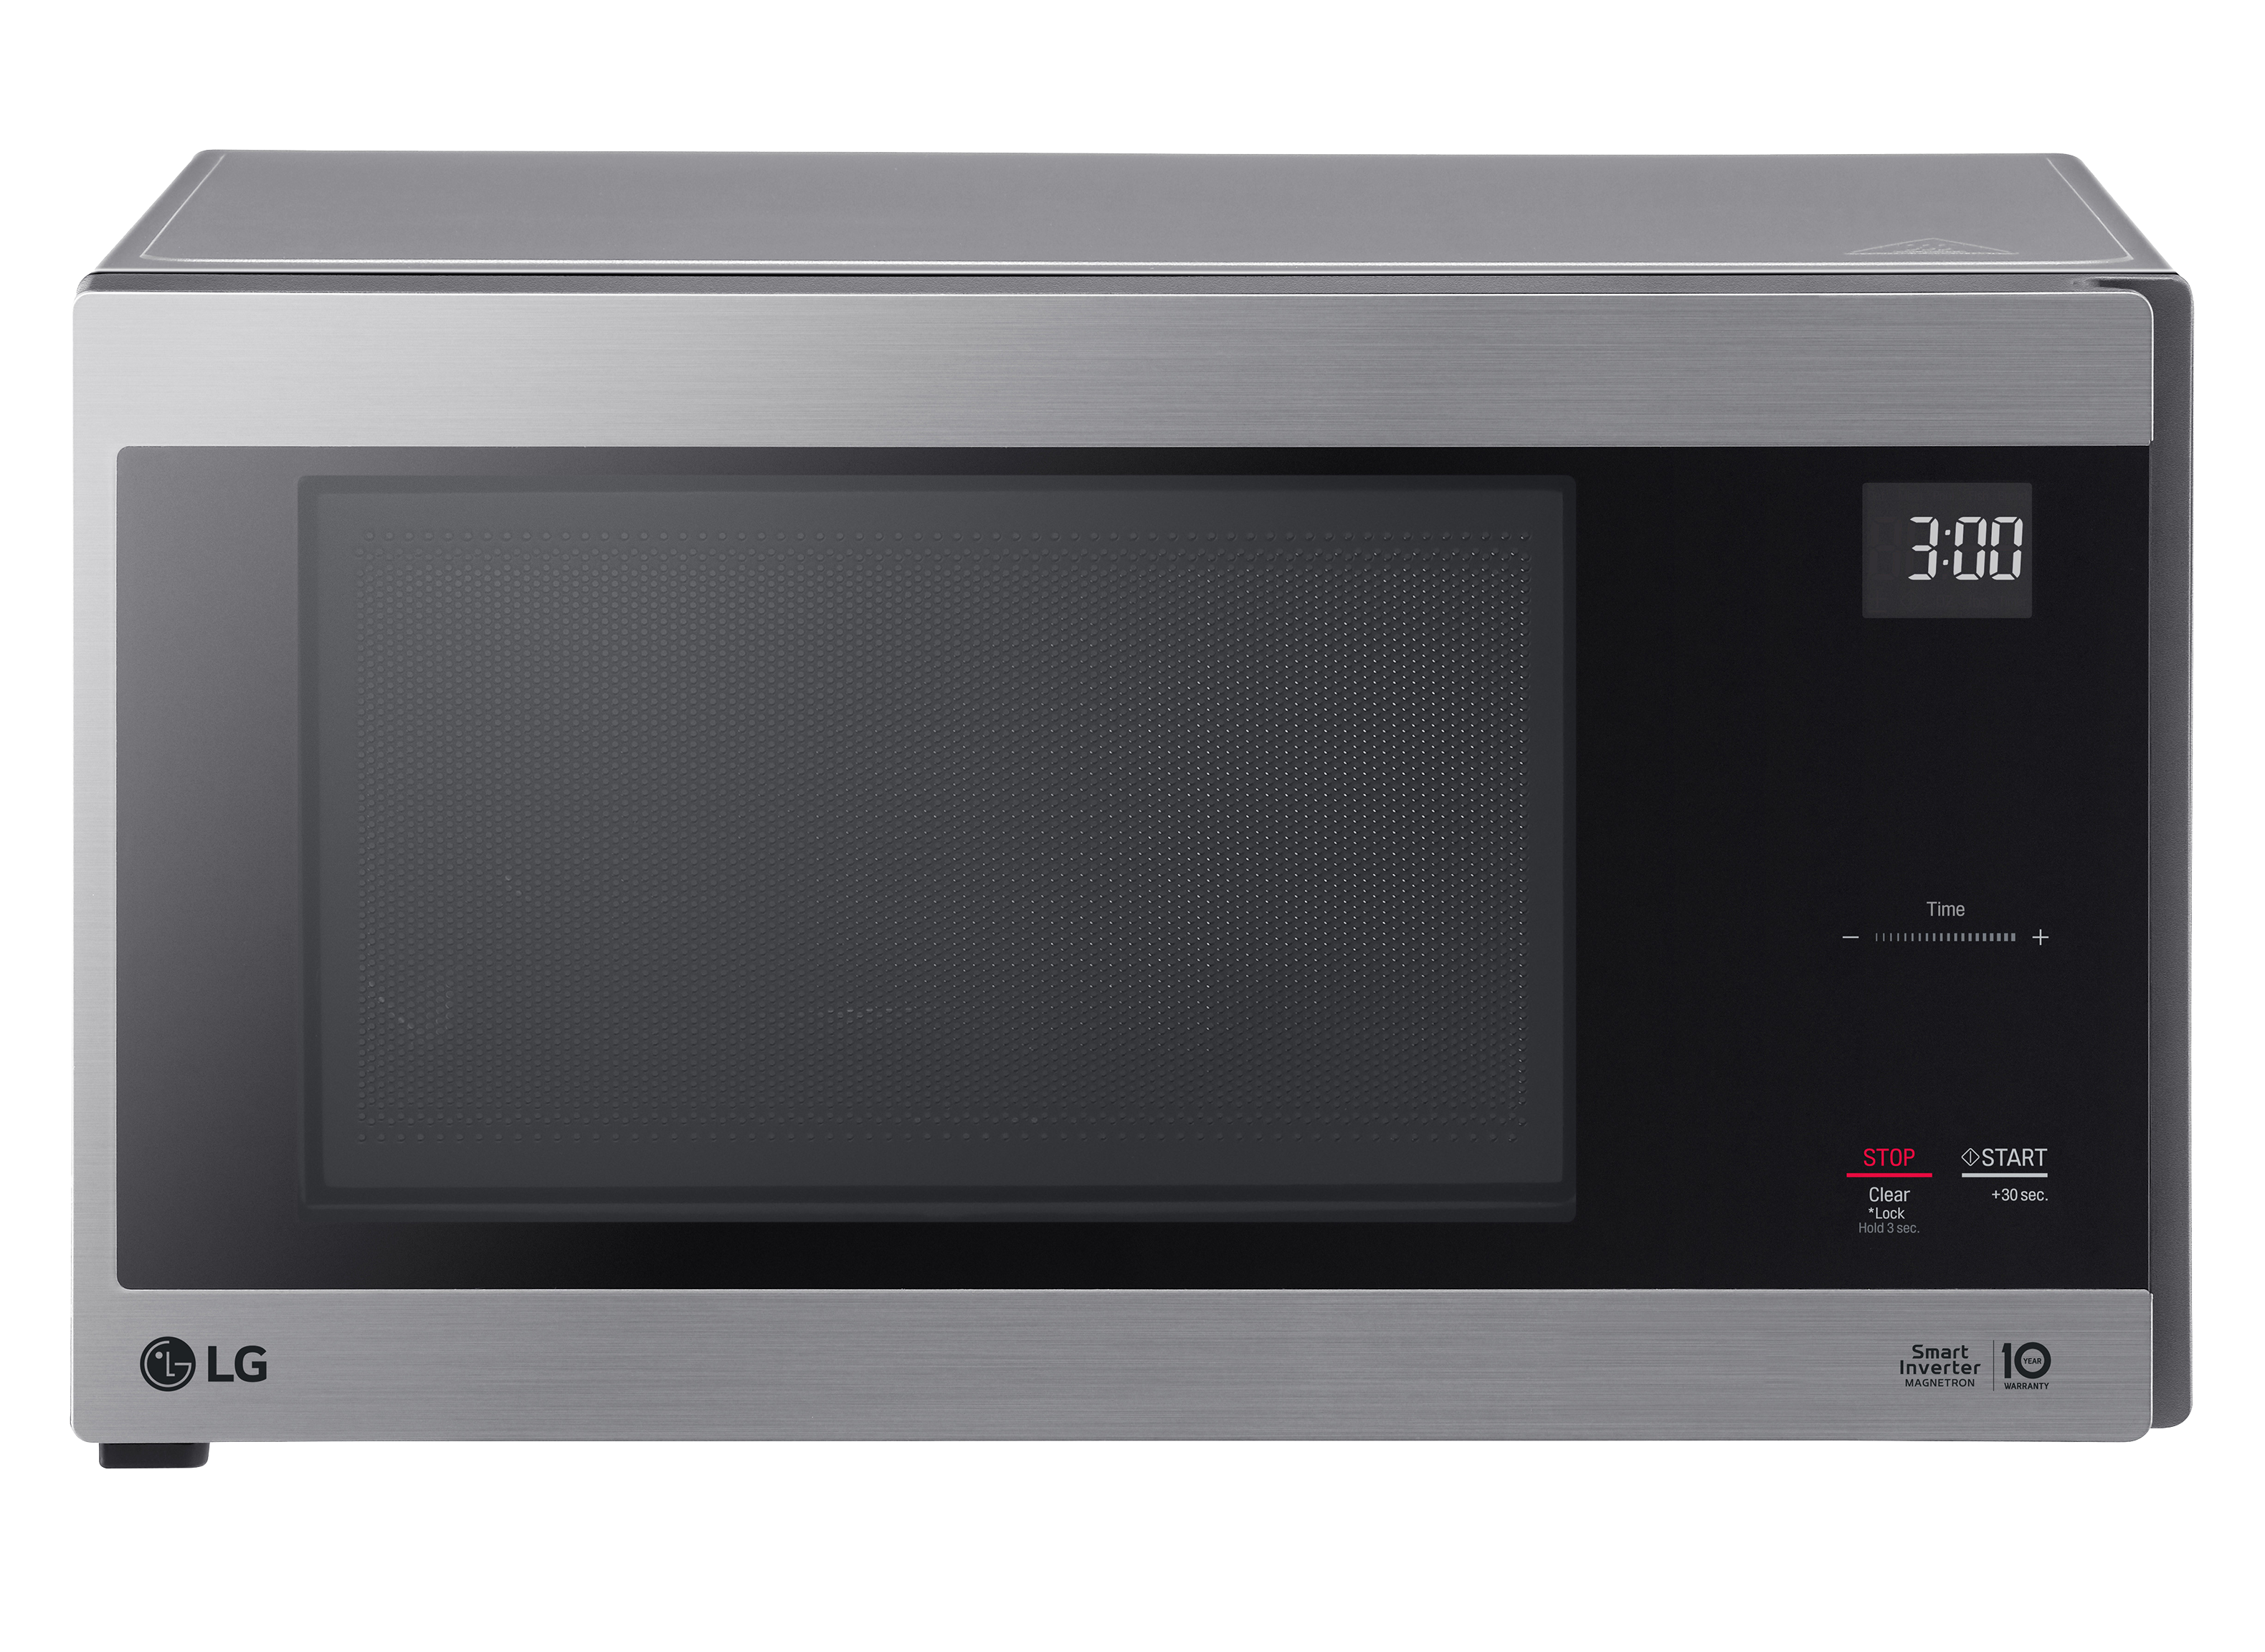 9 Best 12 Volt Microwave Oven For Truckers for 2023